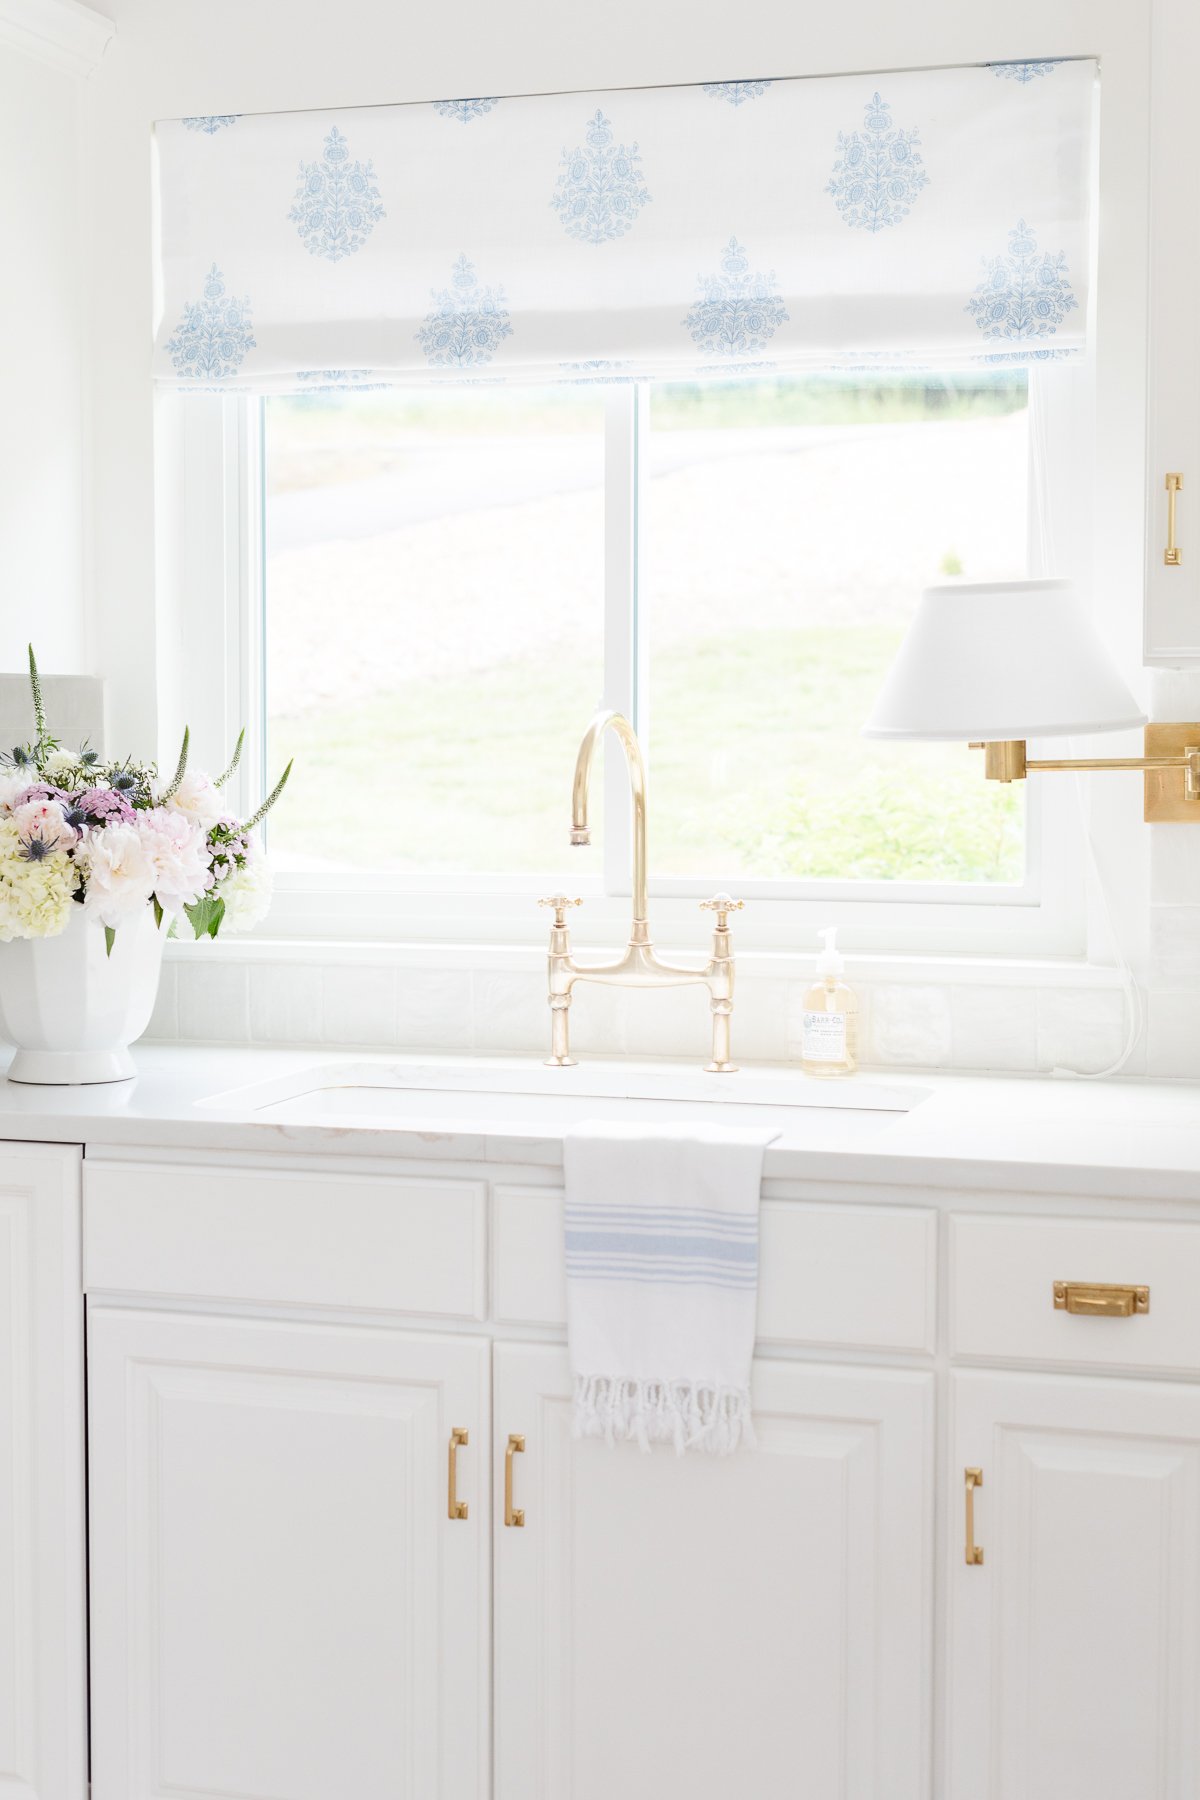 A white kitchen with gold hardware and kitchen counter organization.